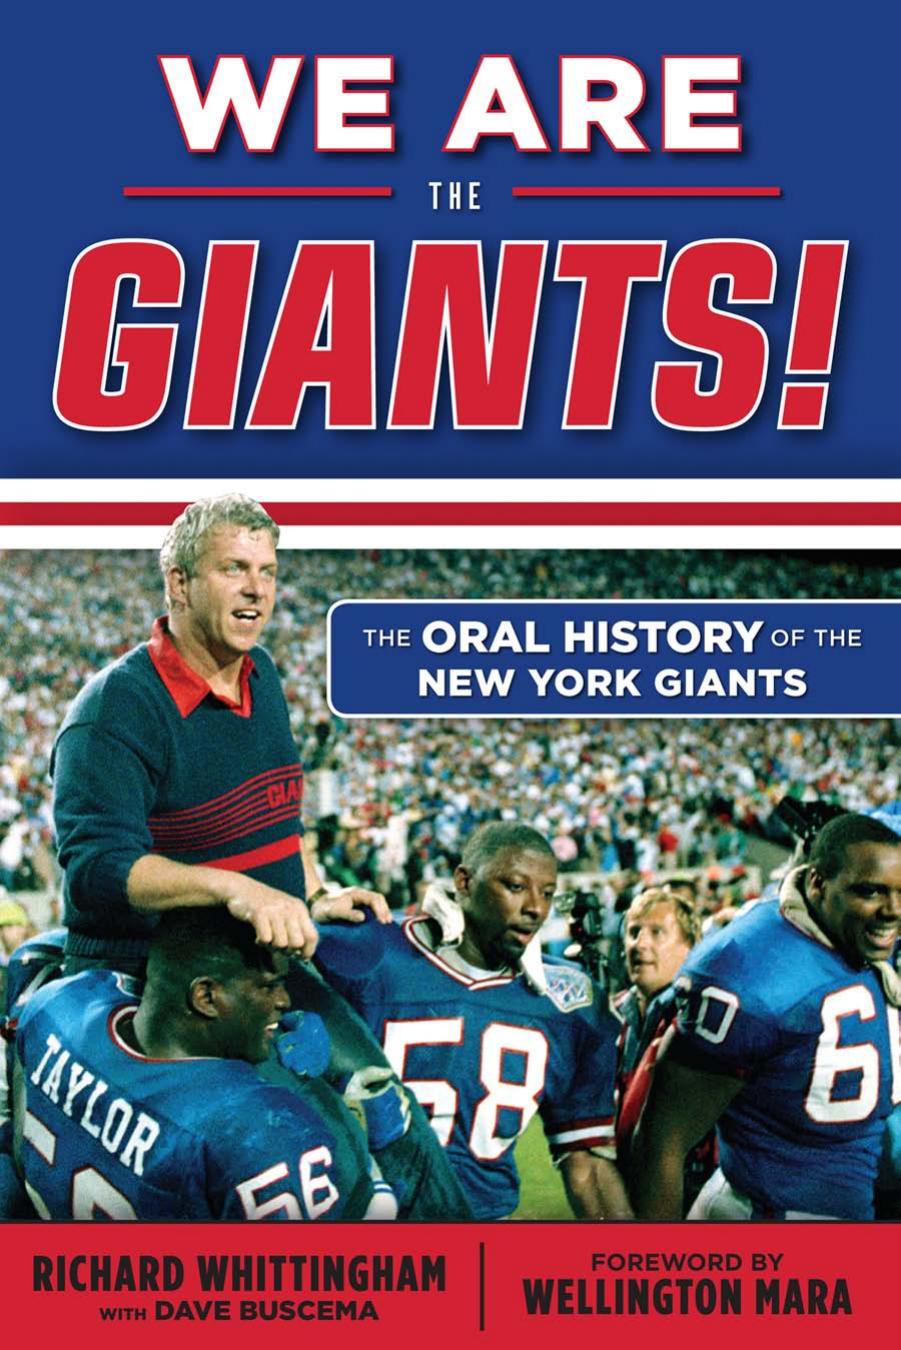 We Are the Giants! : The Oral History of the New York Giants by Richard Whittingham; Dave Buscema; Wellington Mara